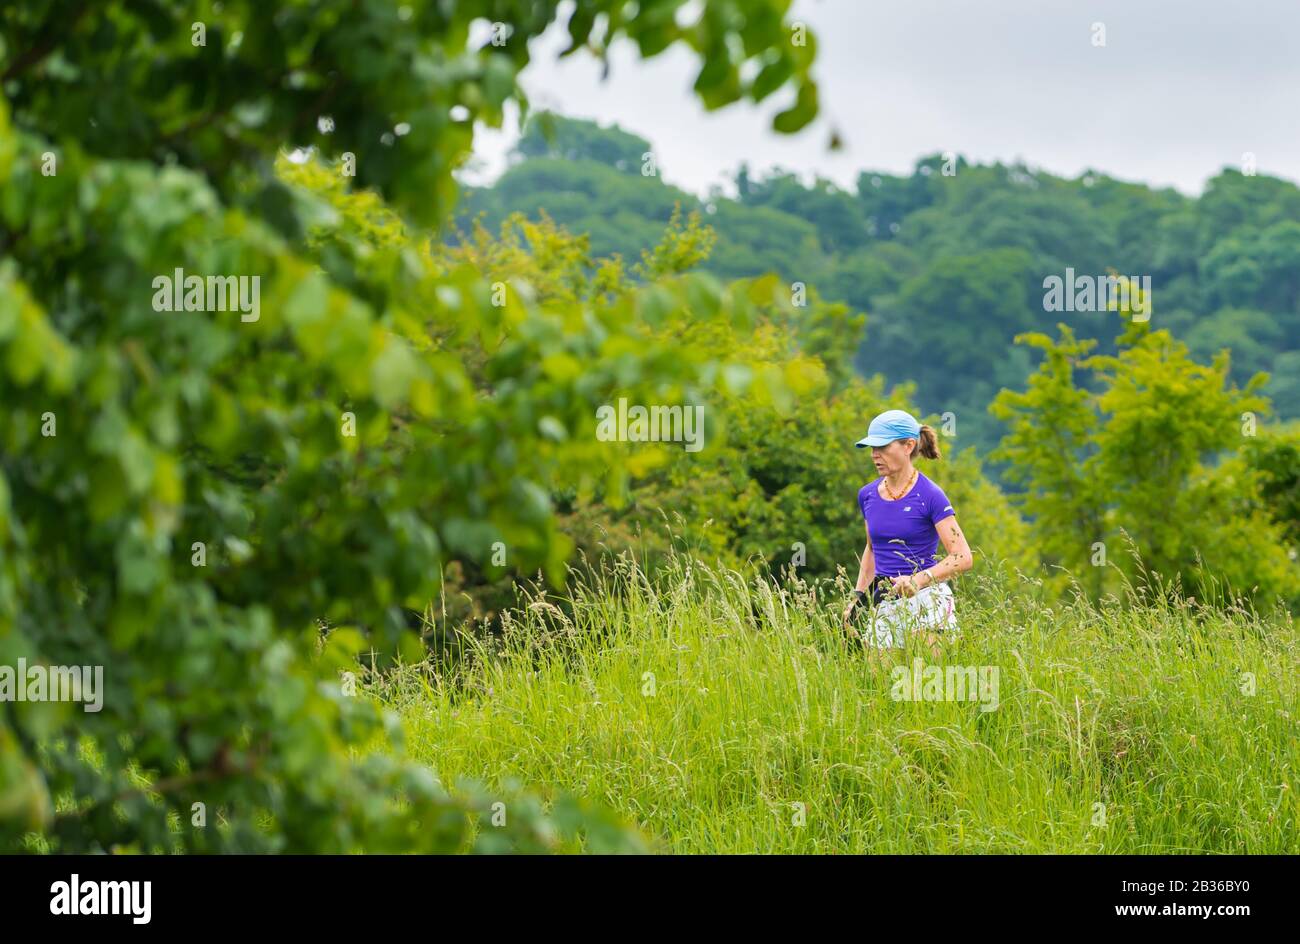 Woman keeping fit as part of a healthy lifestyle by taking a morning jog or run in the countryside in the UK. Stock Photo